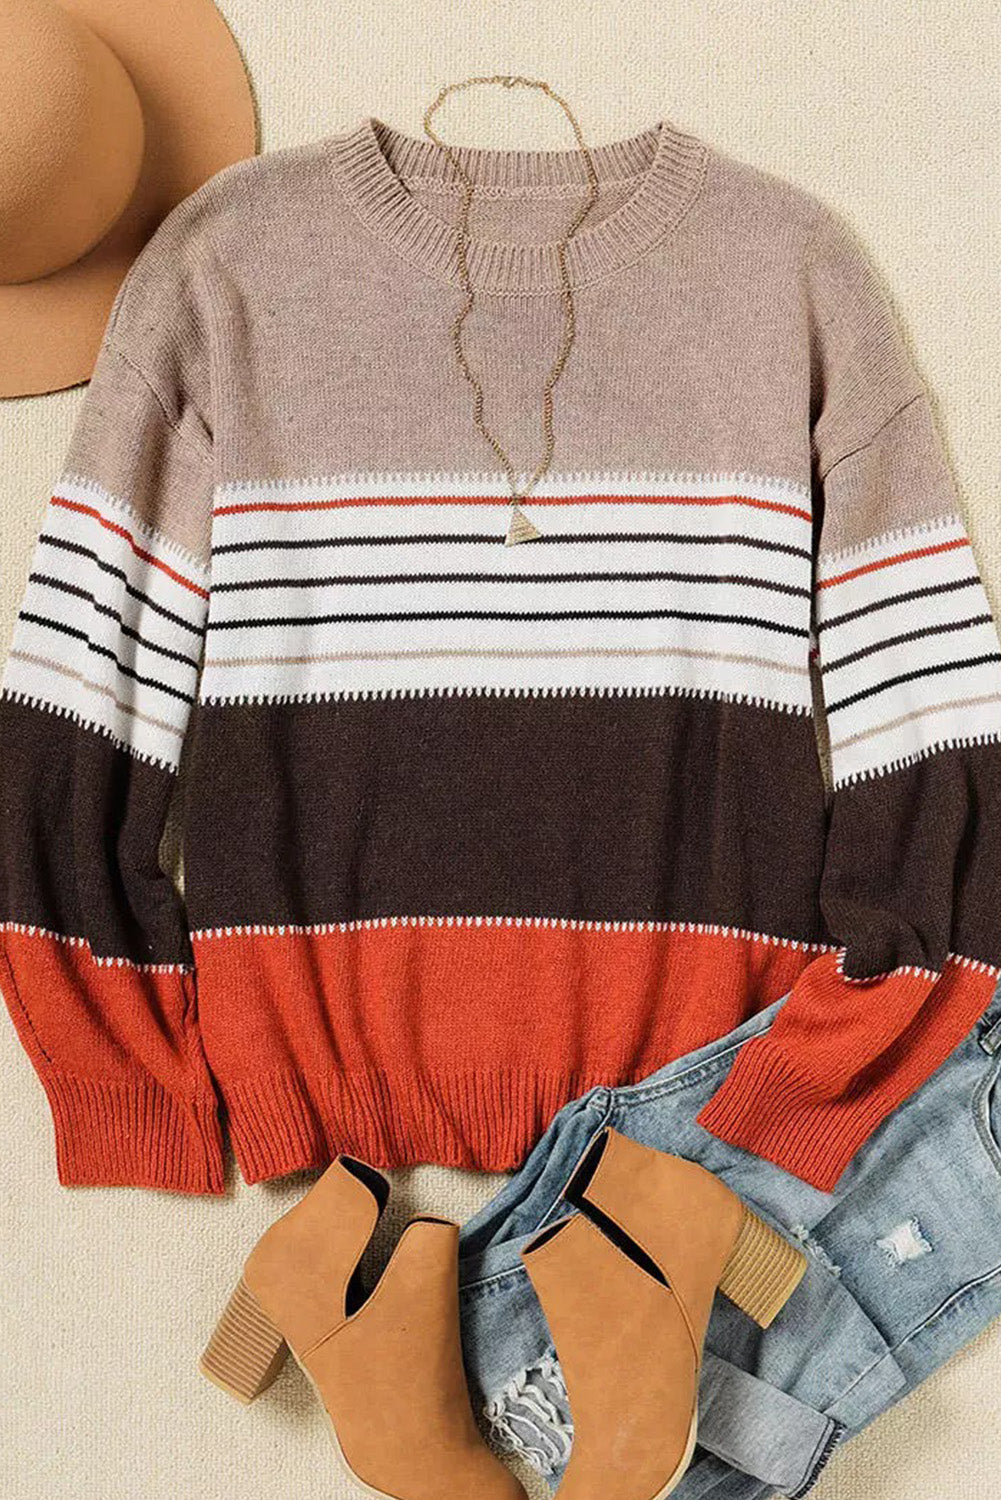 Color Block Striped Knit Oversize Sweater 2546